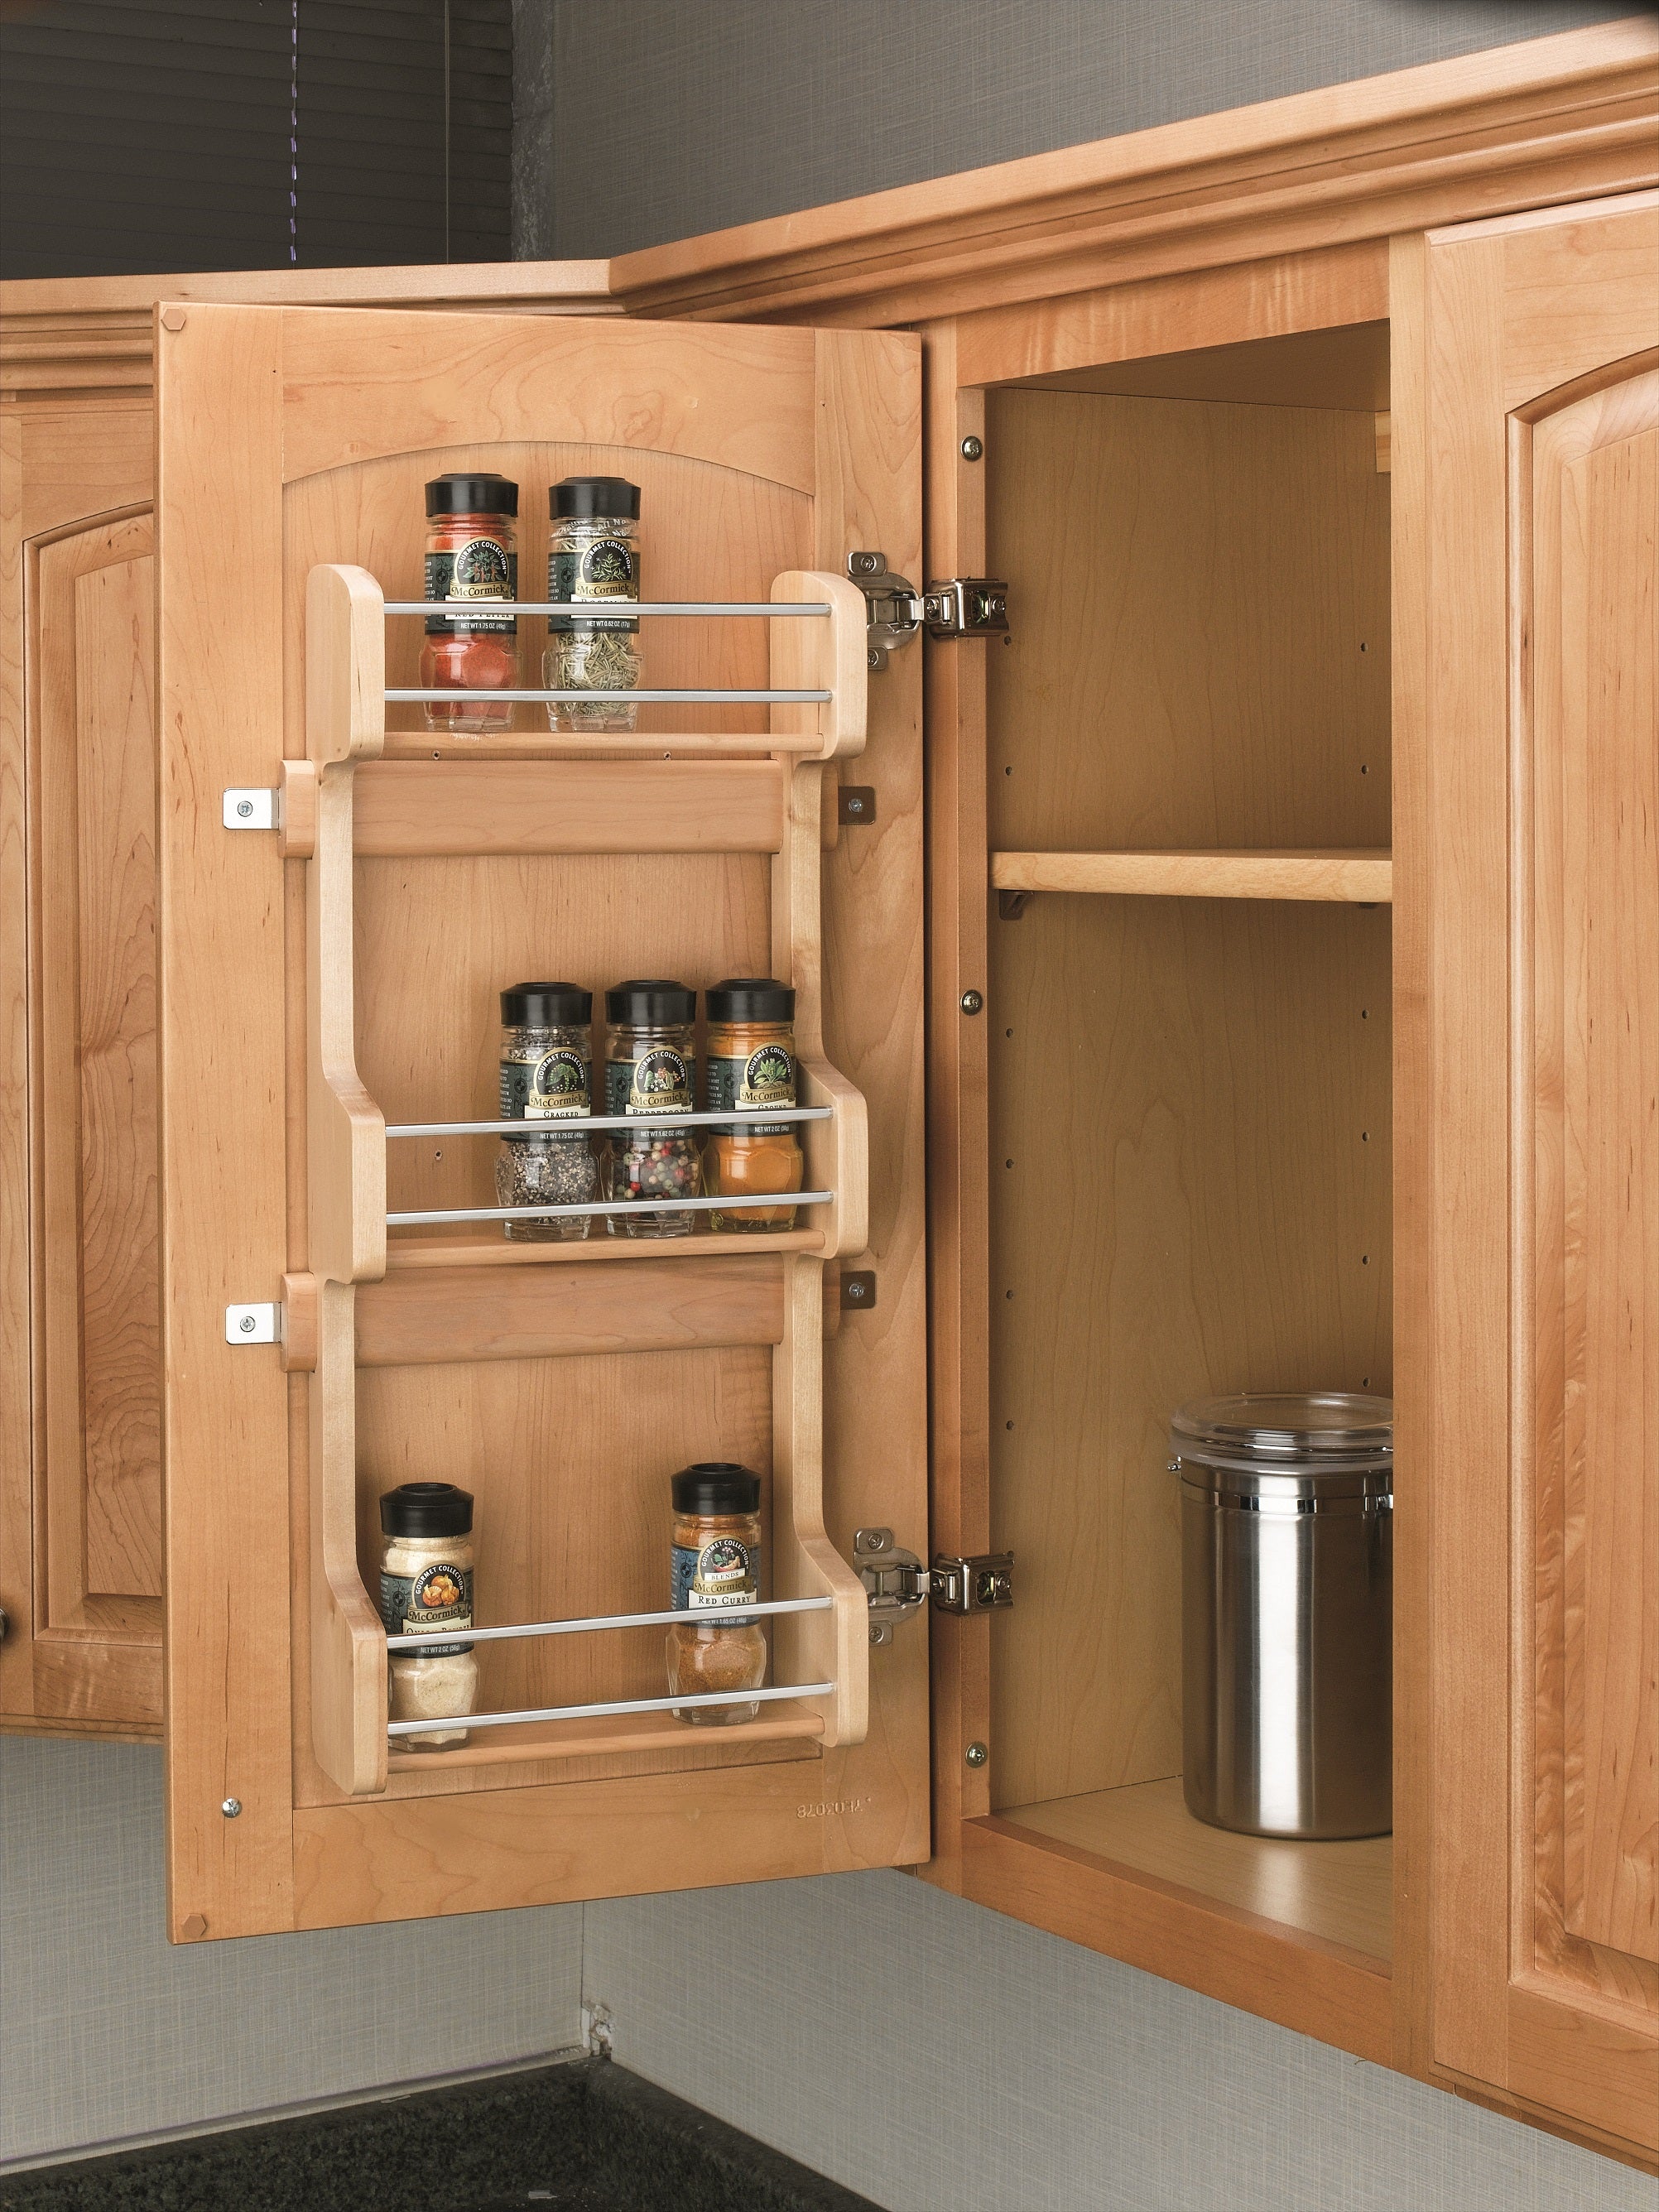 Rev-A-Shelf Pull Out Wall Storage Organizer for Kitchen Cabinets, Sliding  Door Mounted Spice Rack with 3 Adjustable Shelves, Maple Wood, 4ASR-15